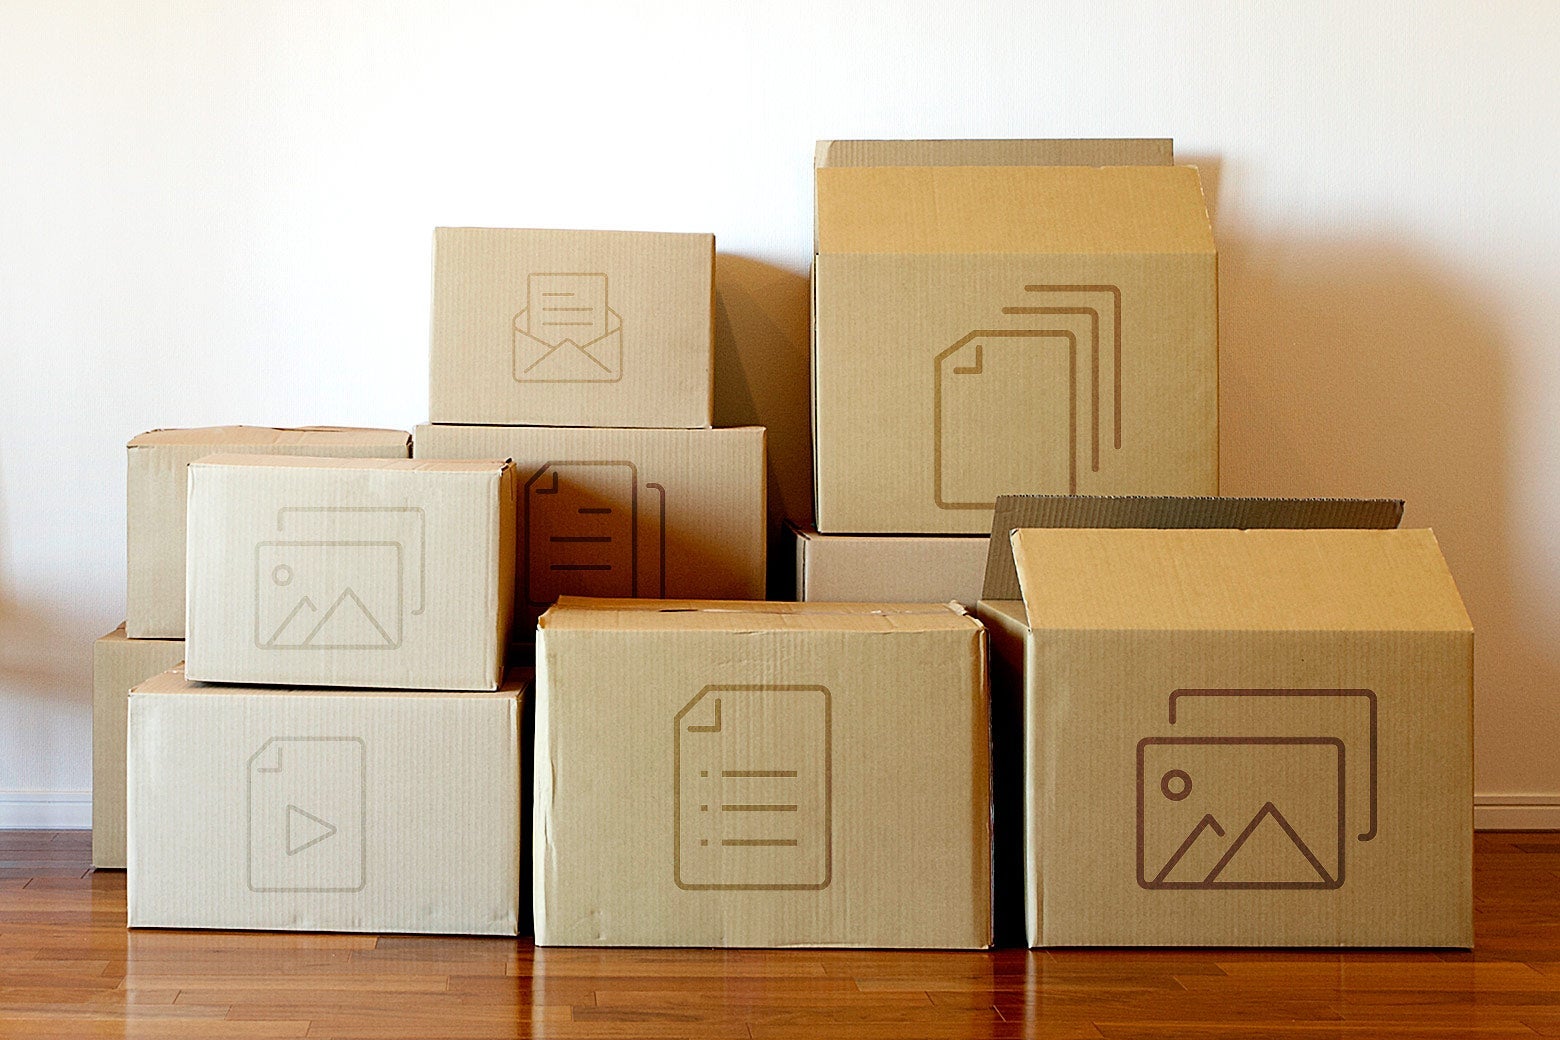 Cardboard moving boxes with app icons on them, stacked against a wall.